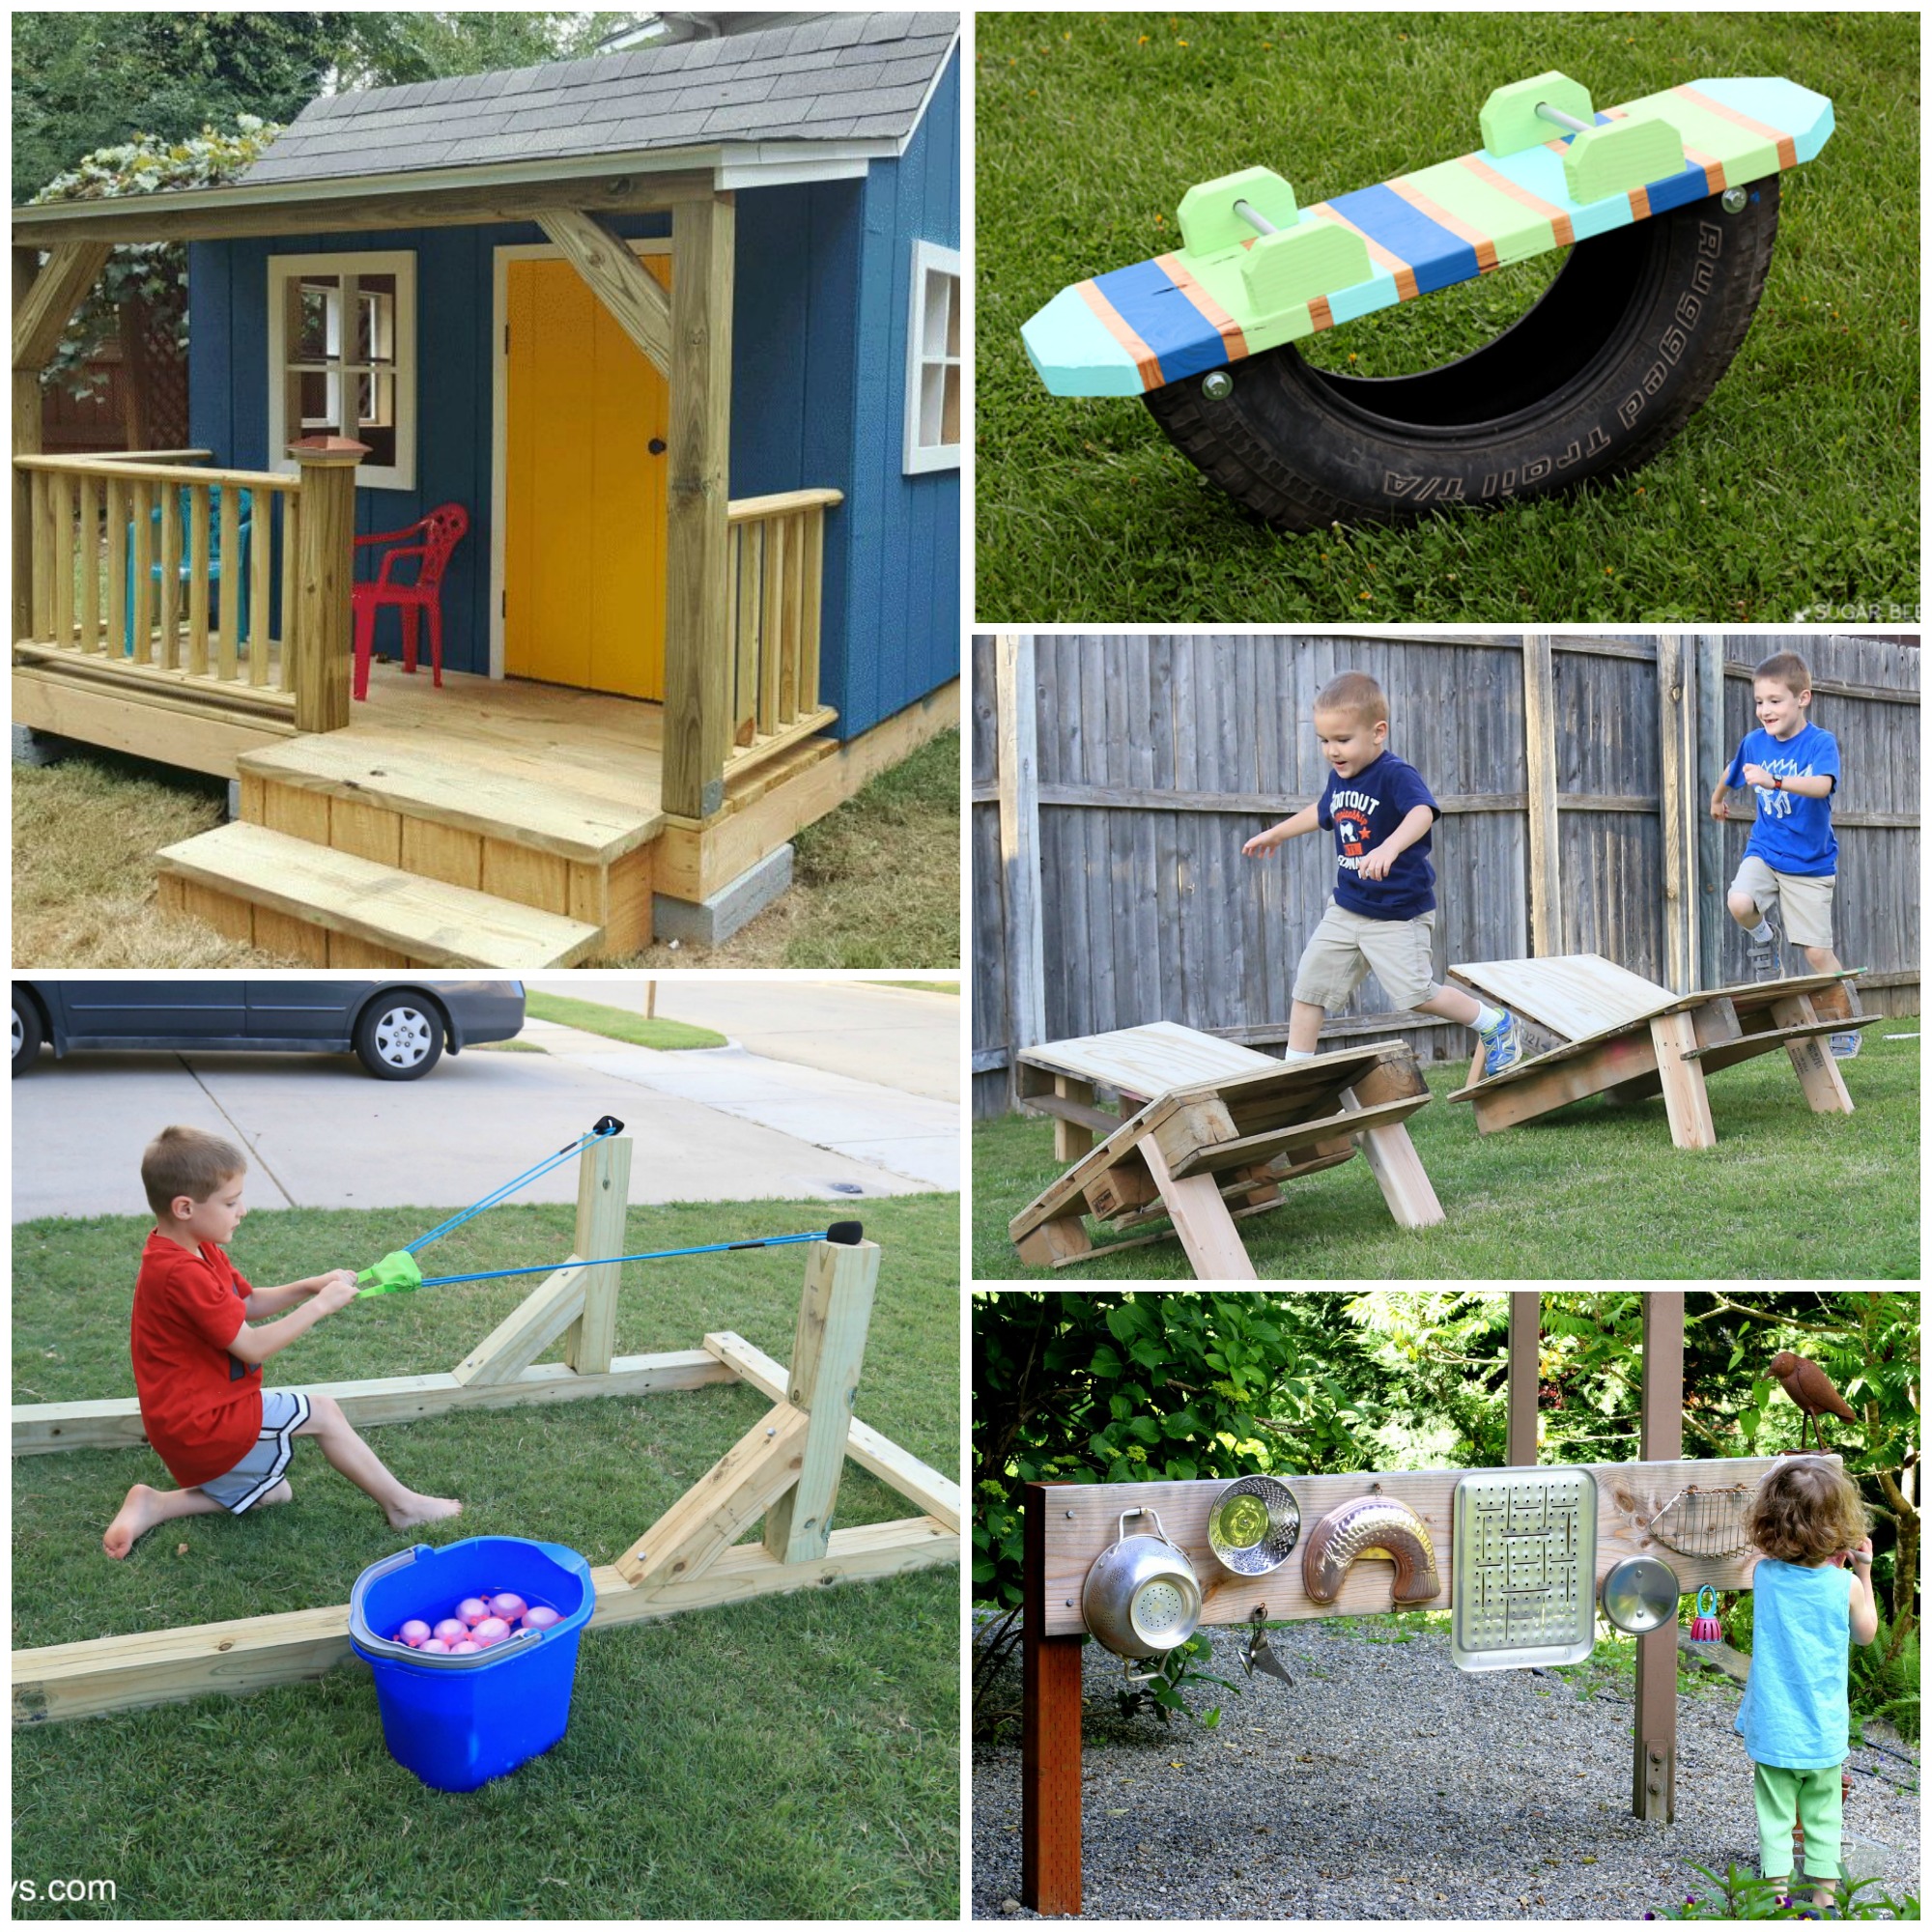 25 Awesome Backyard Play Spaces to Make